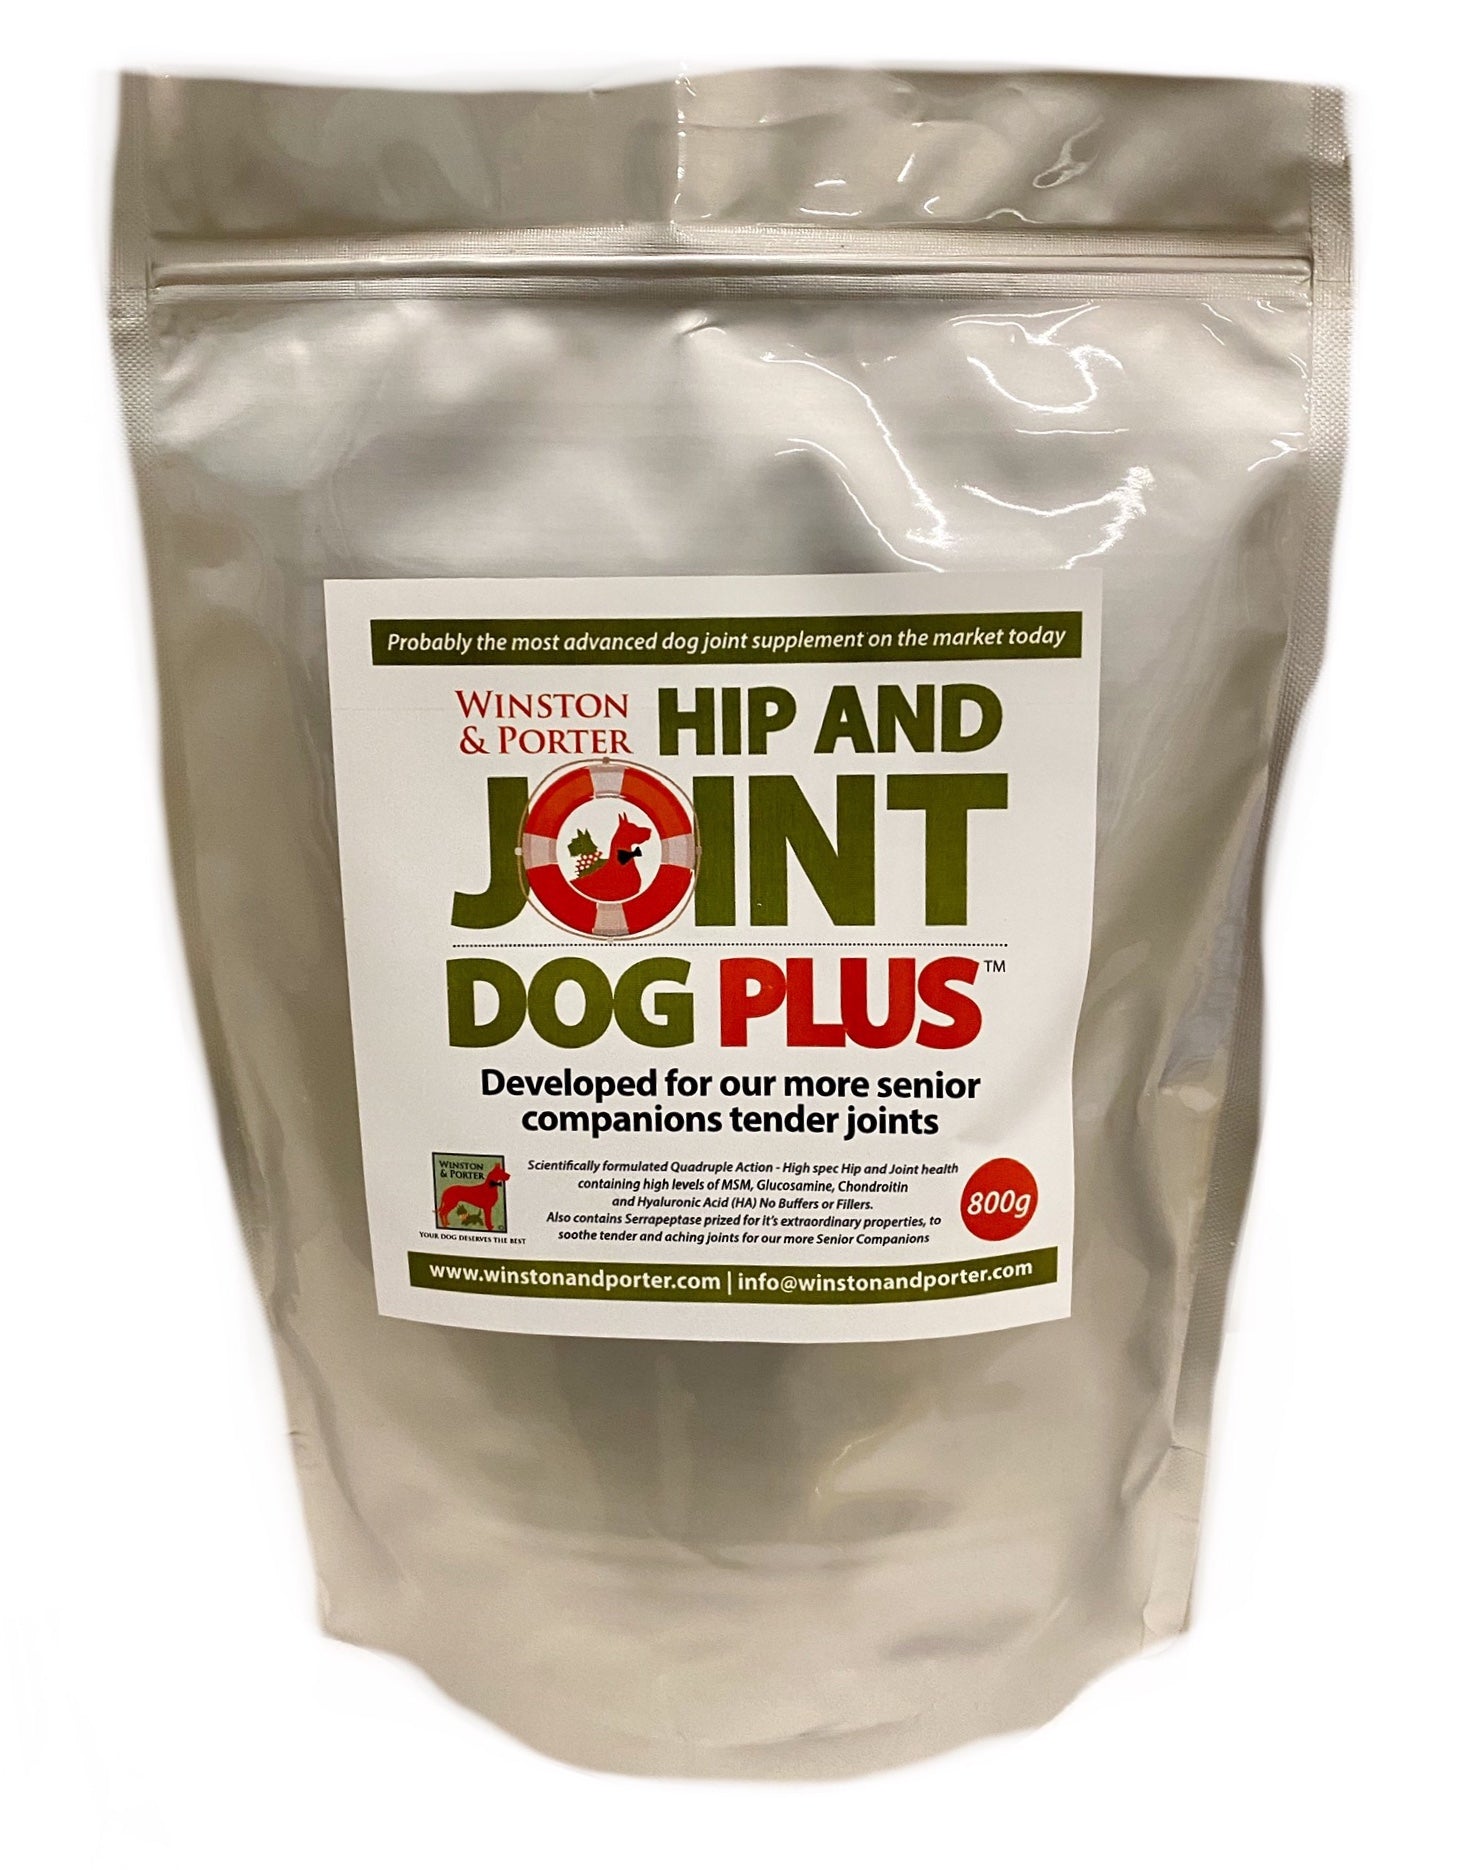 Hip and Joint Dog PLUS for 100g from - Winston and Porter